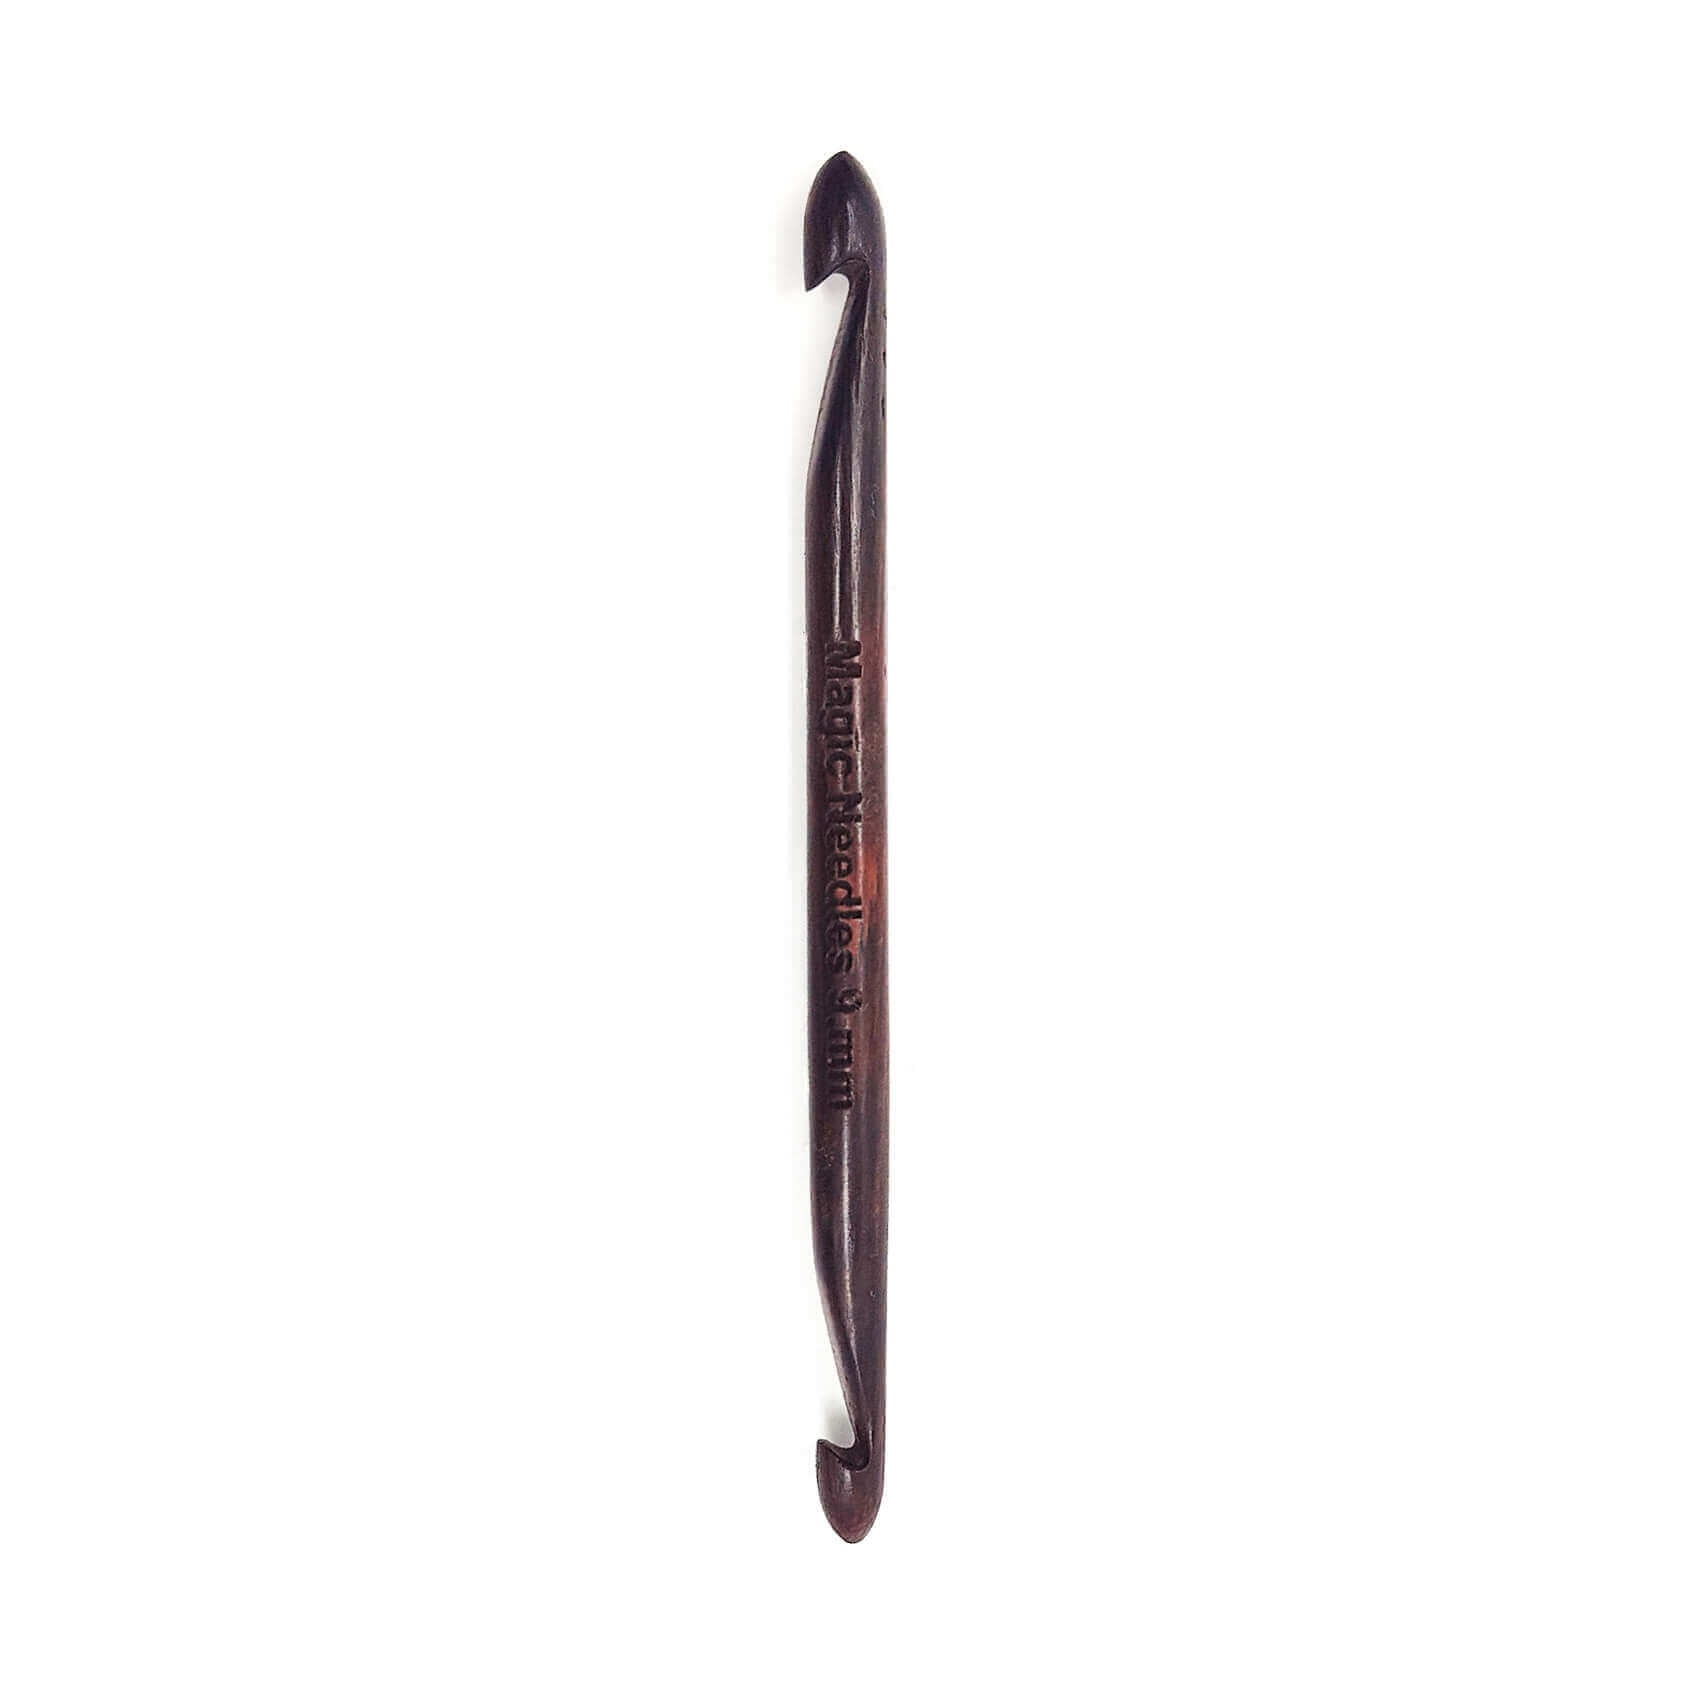 Rosewood Double Ended Crochet Hook - 9 mm